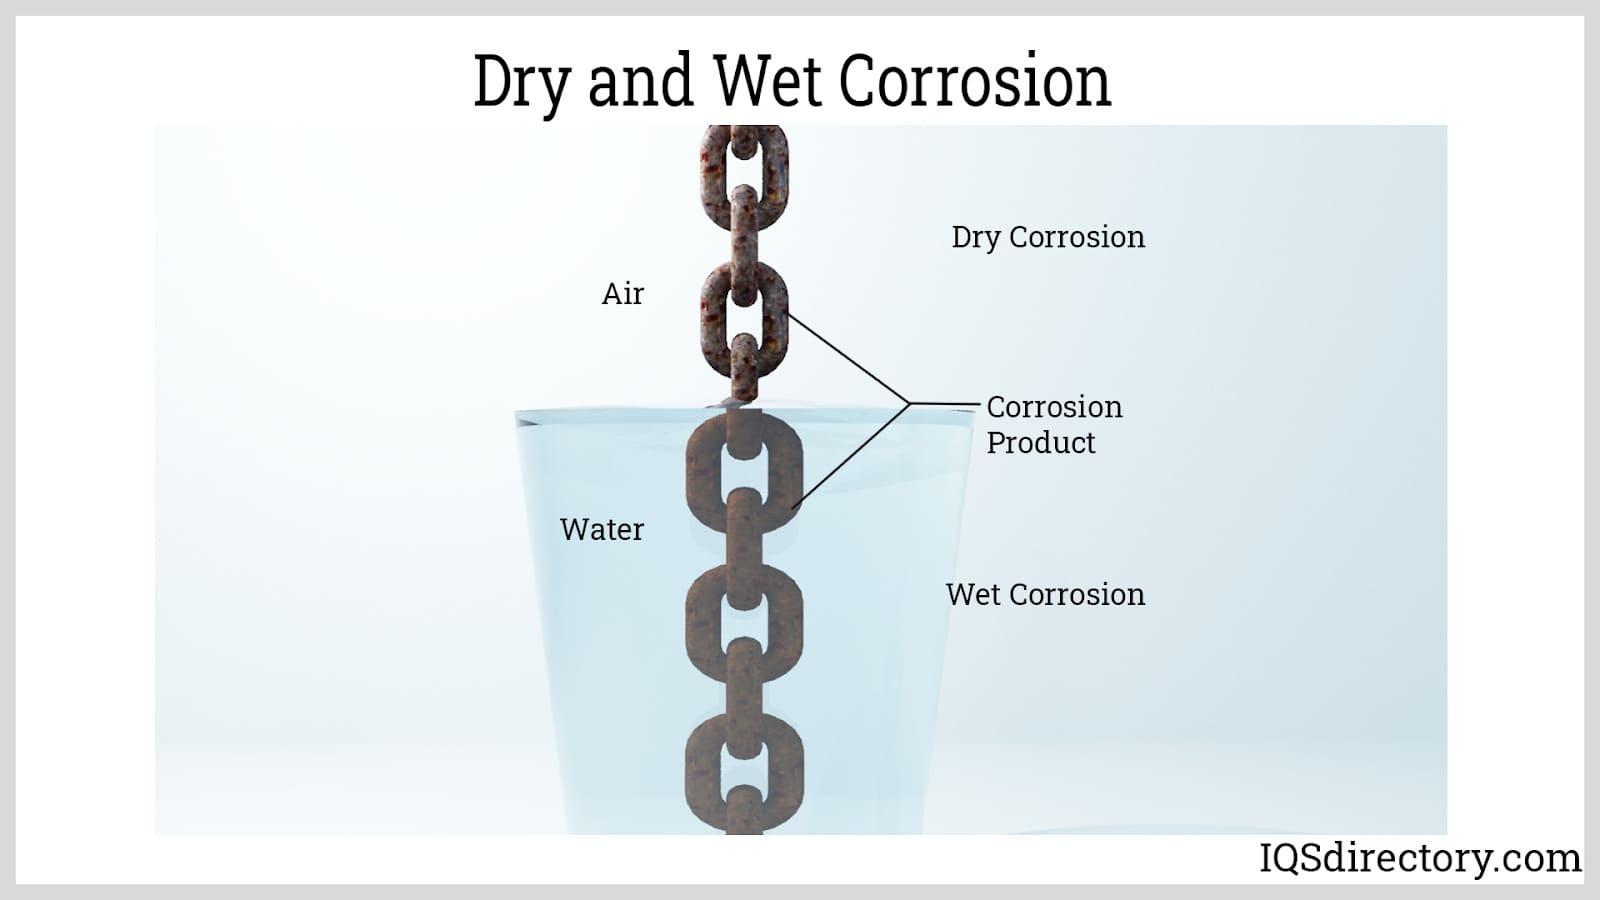 Dry and Wet Corrosion